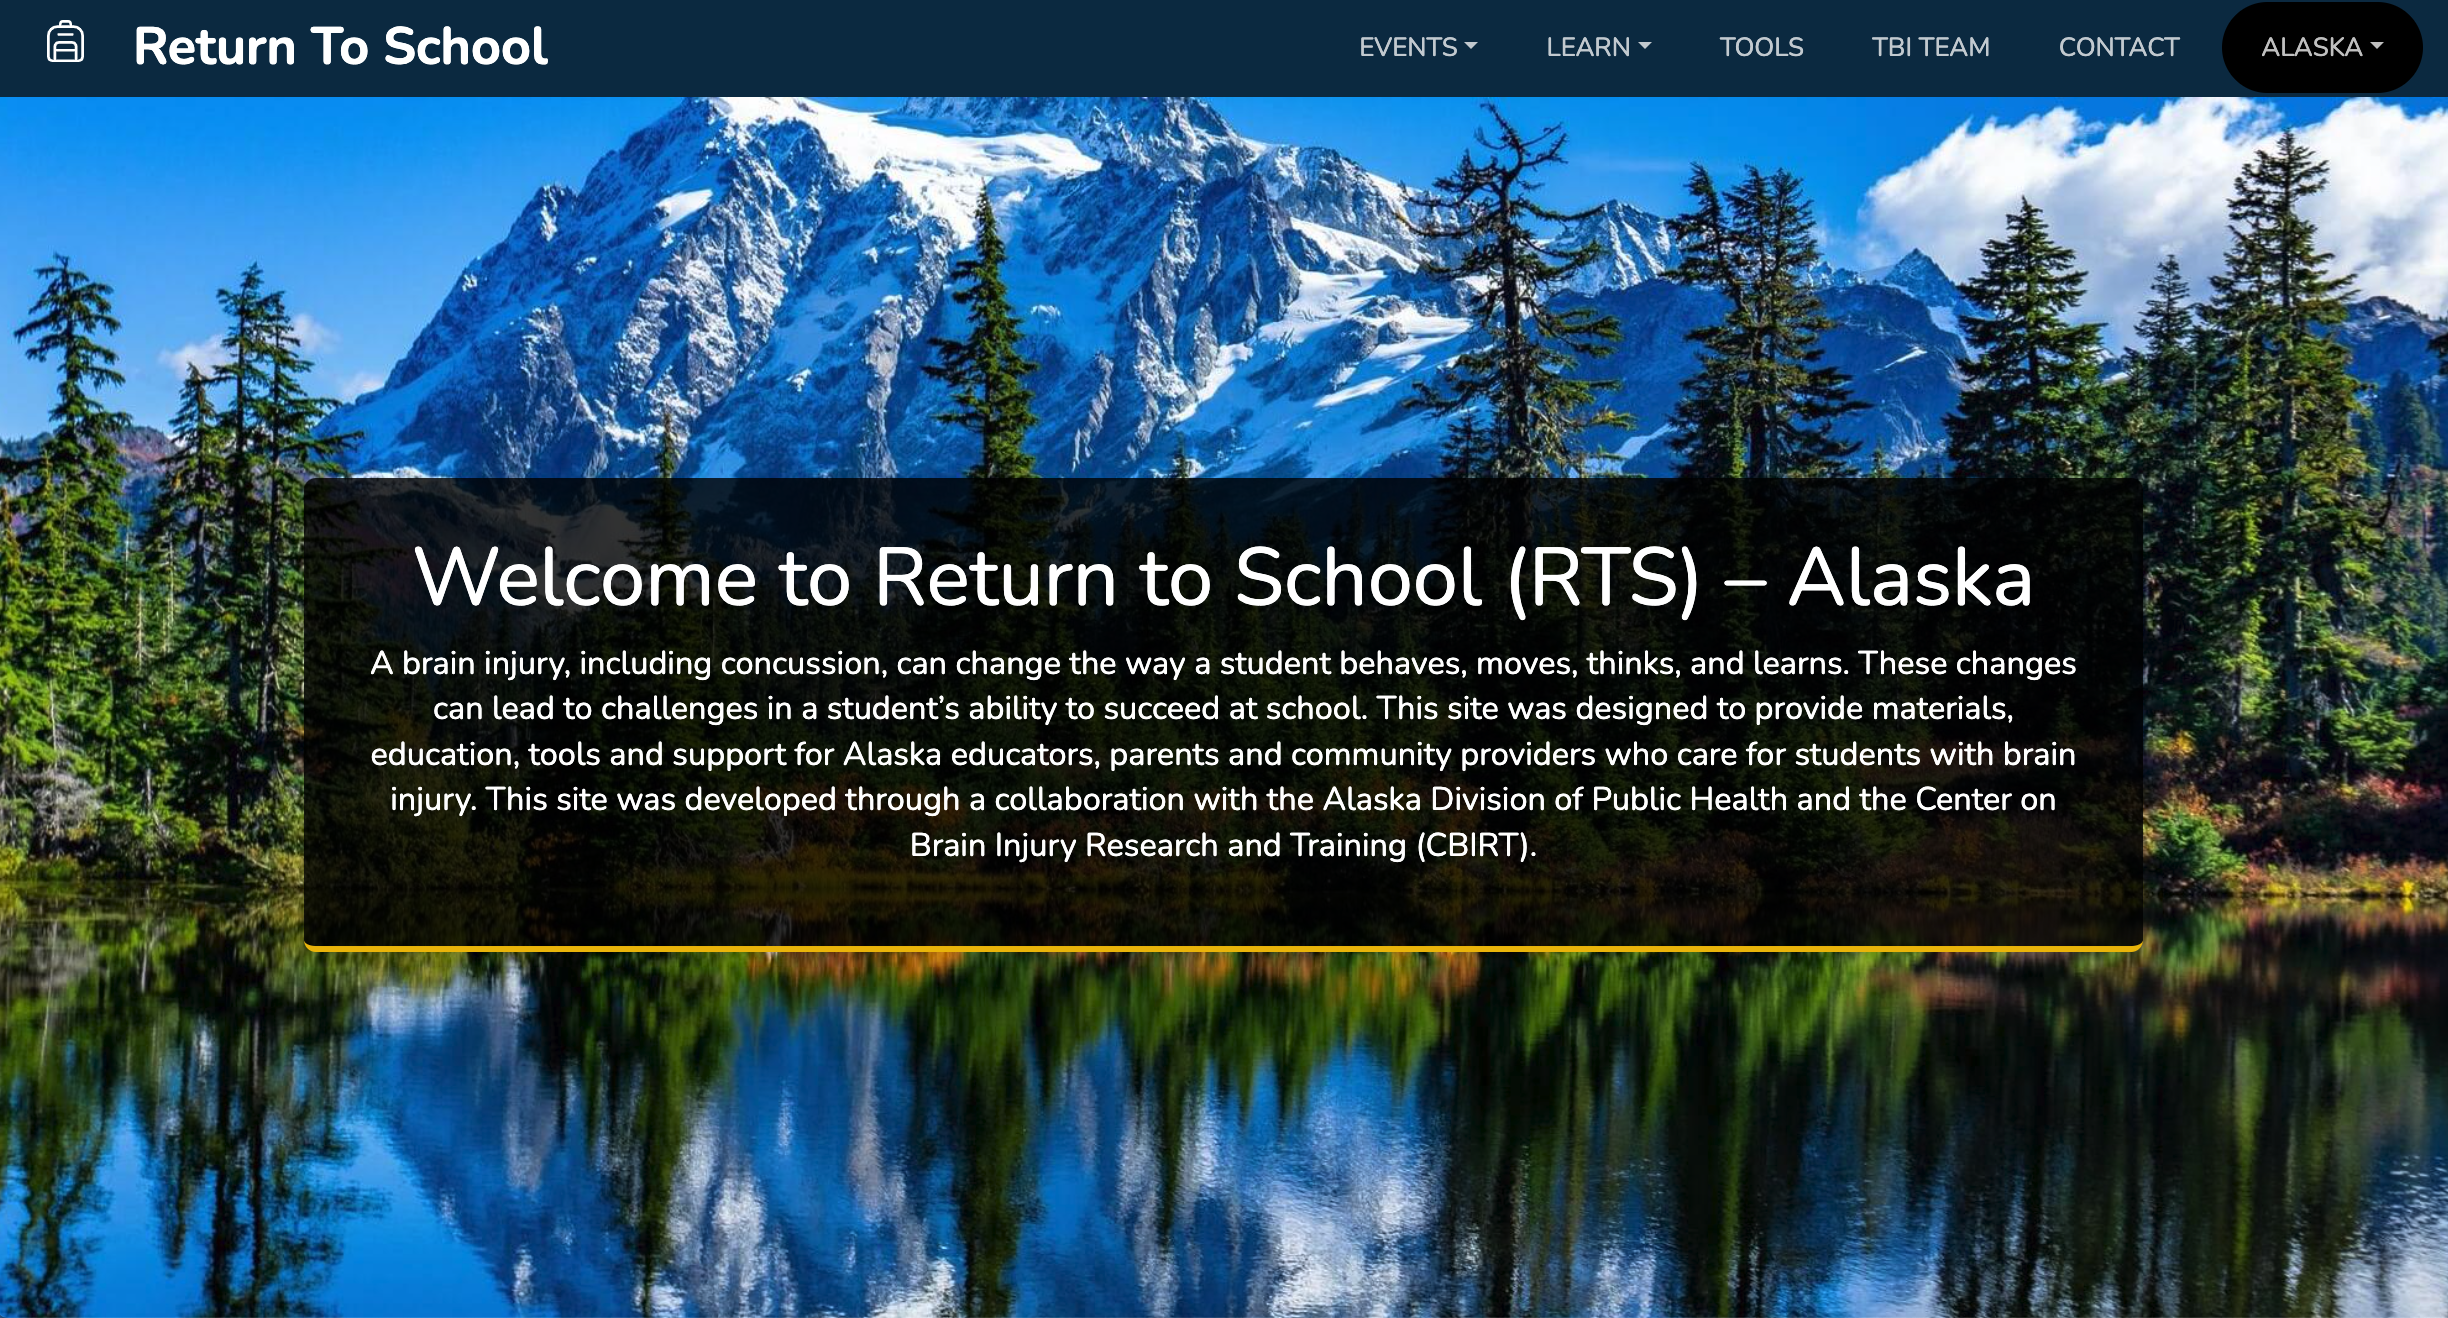 Landing page of ReturnToSchool.org, linking to the site.